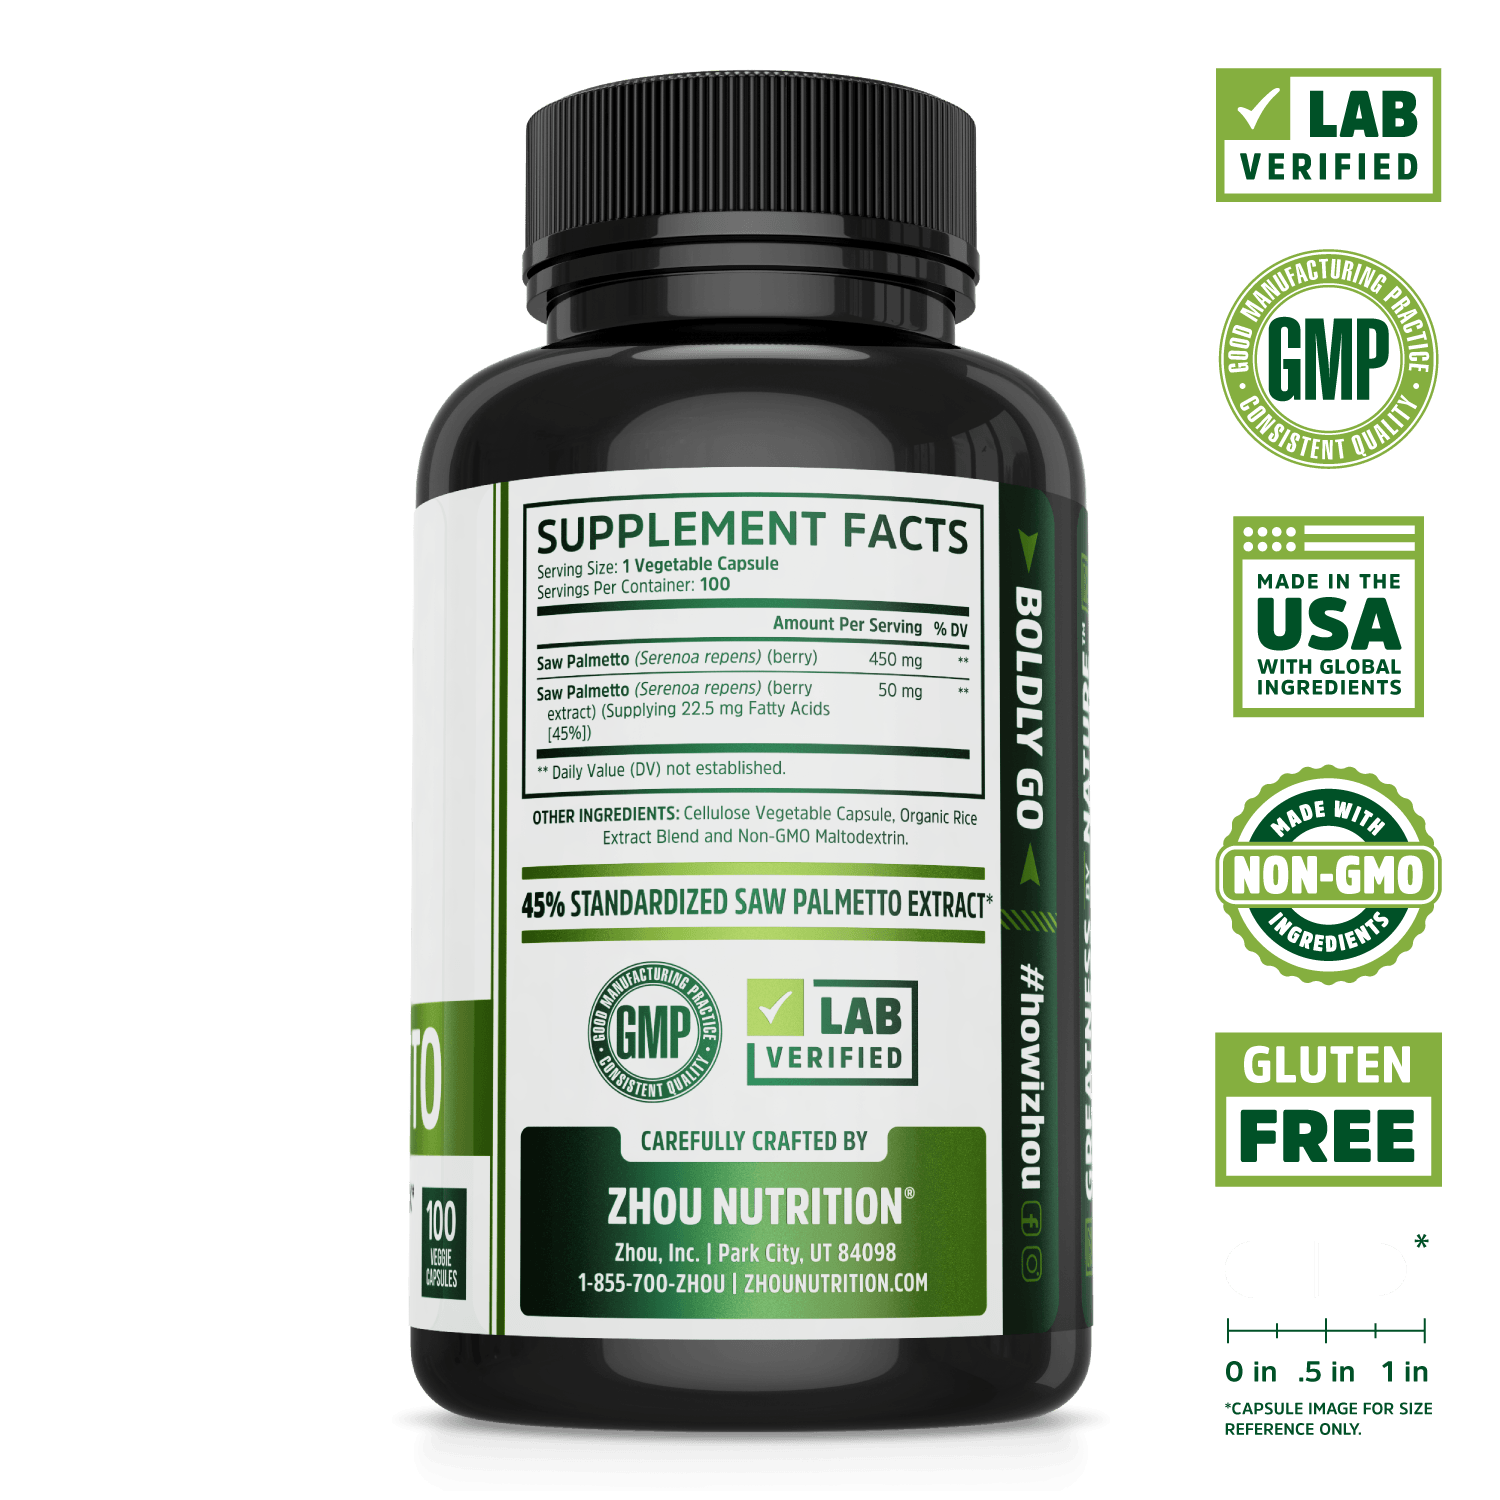 Saw Palmetto Capsules for Prostate Health. Lab verified, good manufacturing practices, made in the USA with global ingredients, made with non-GMO ingredients, gluten free.